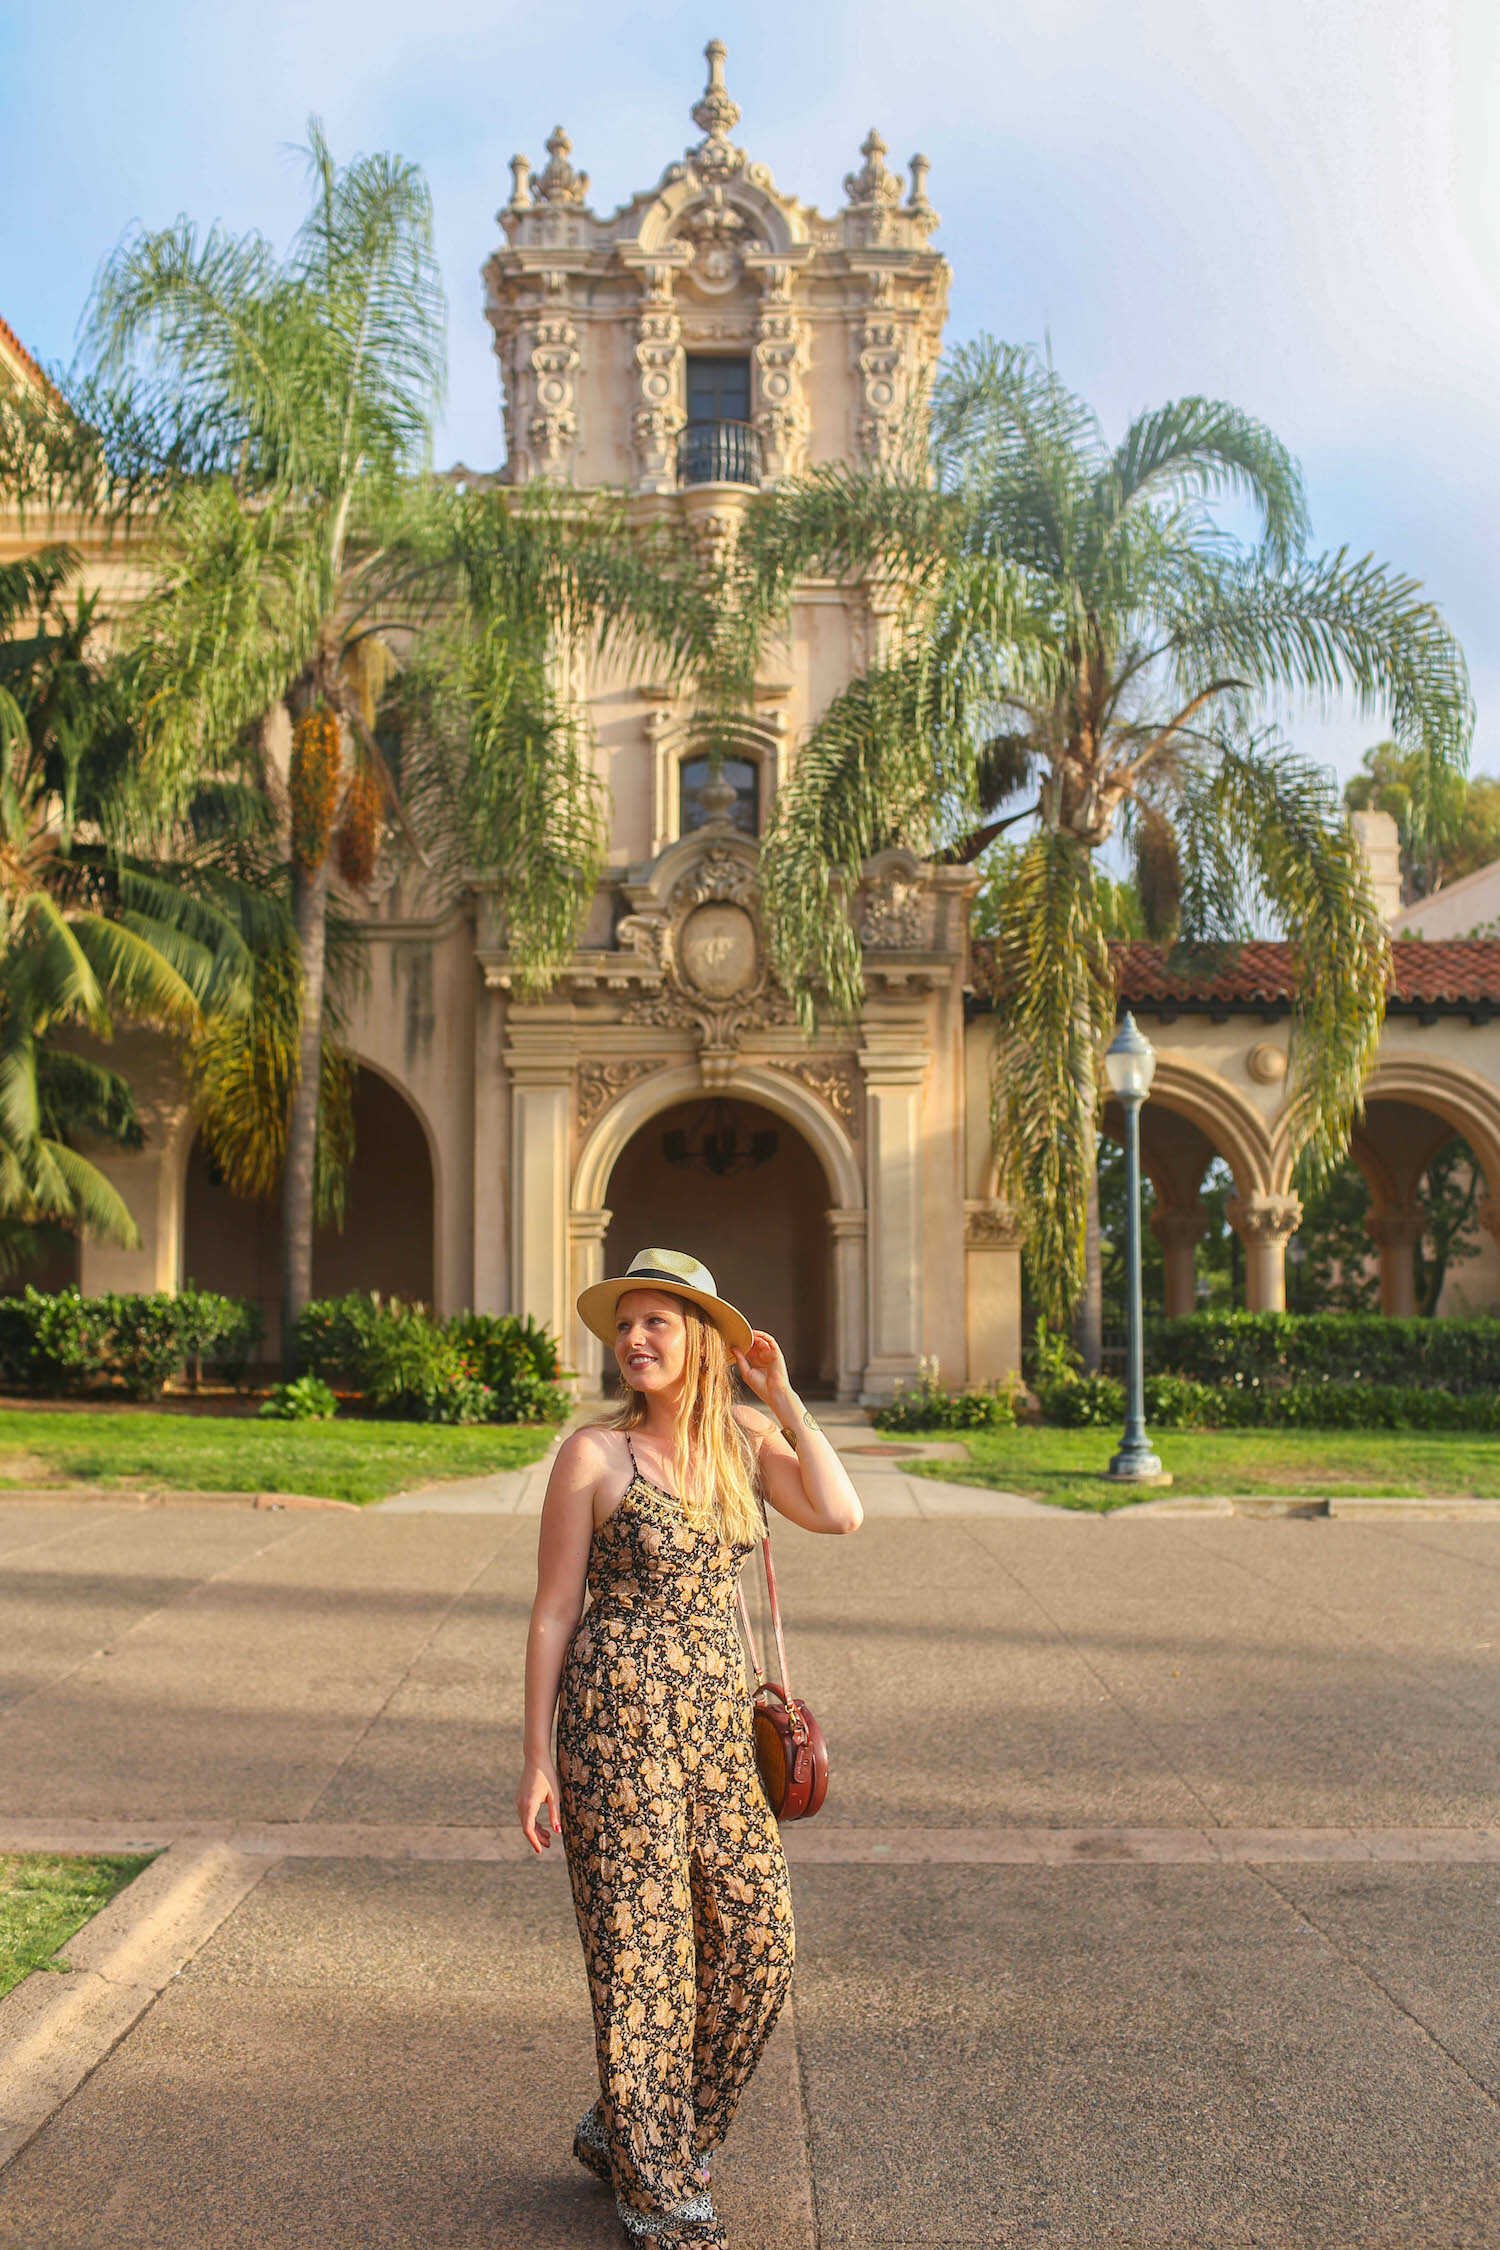 Beautiful Places in San Diego to Take Family Pictures - Spanish Colonial architecture inside Balboa Park.